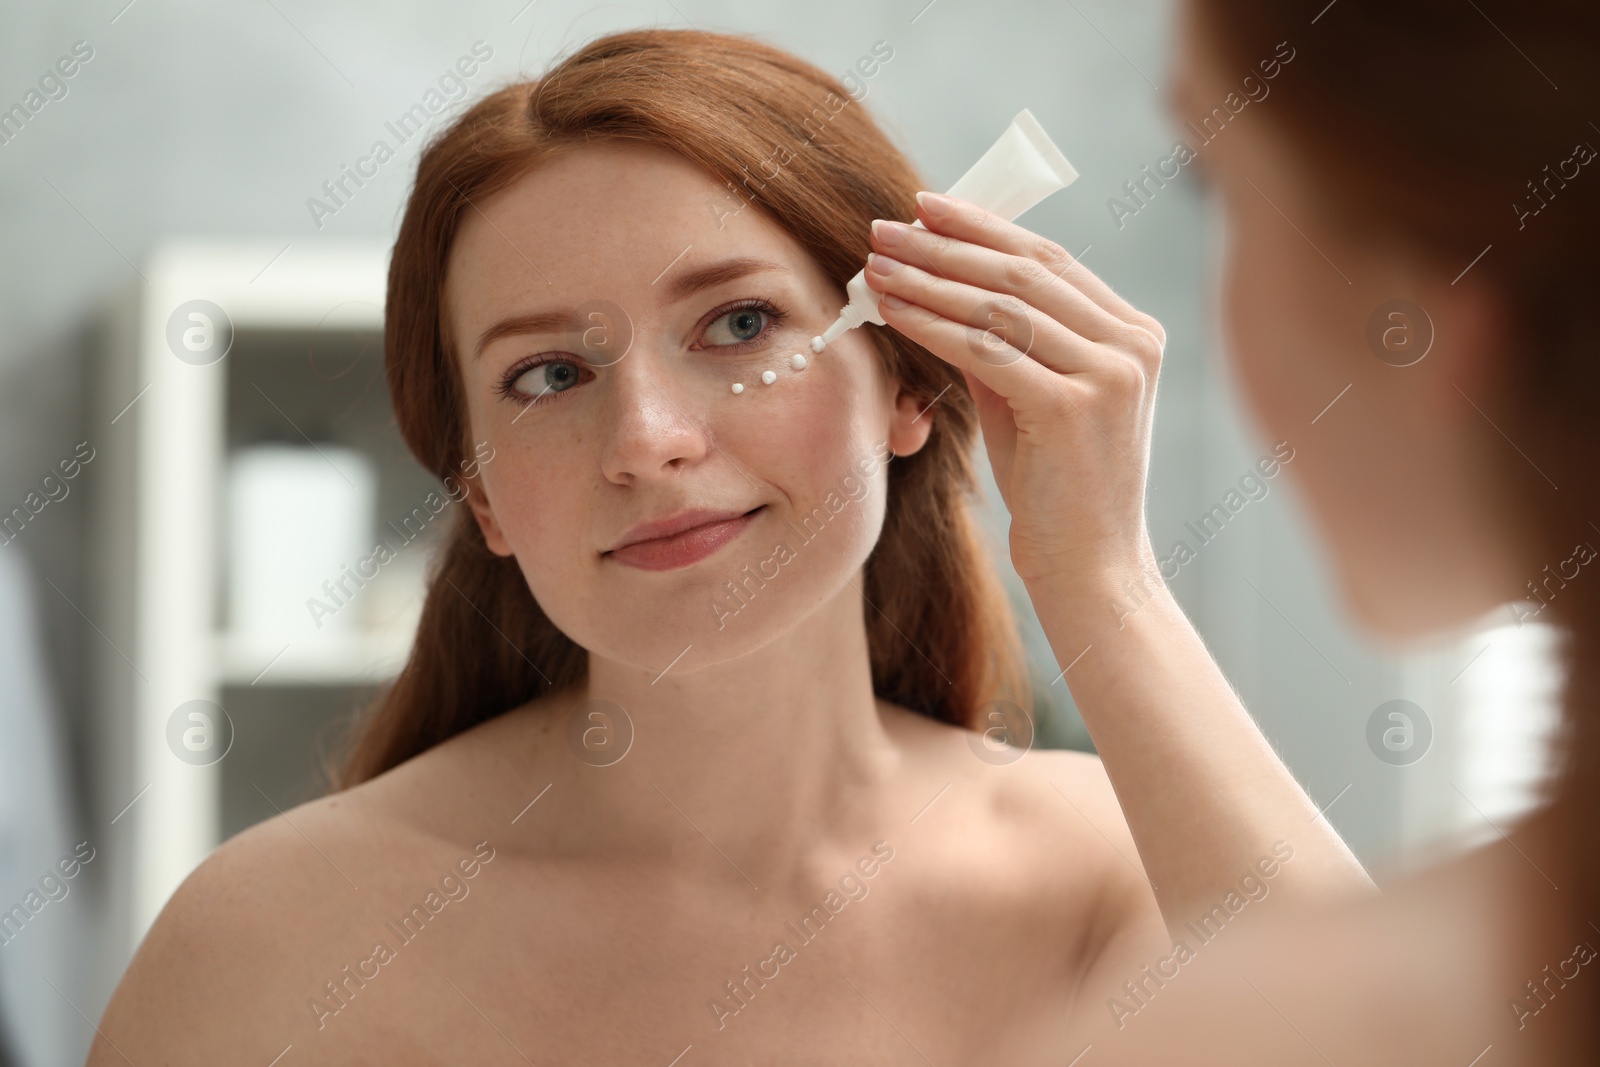 Photo of Beautiful woman with freckles applying cream onto her face near mirror in bathroom